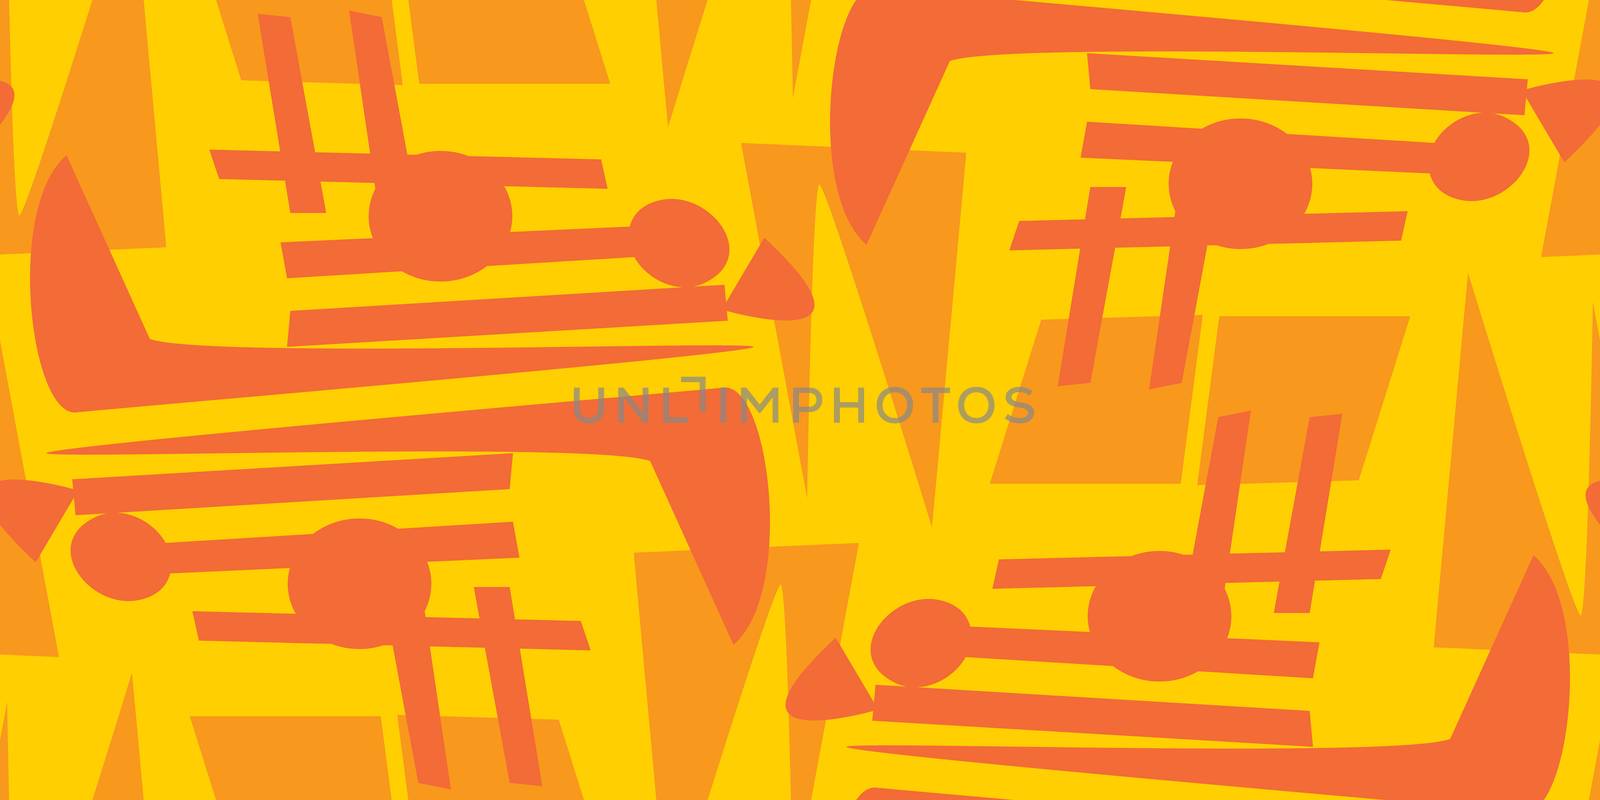 Chaotic Orange Seamless Patterns by TheBlackRhino